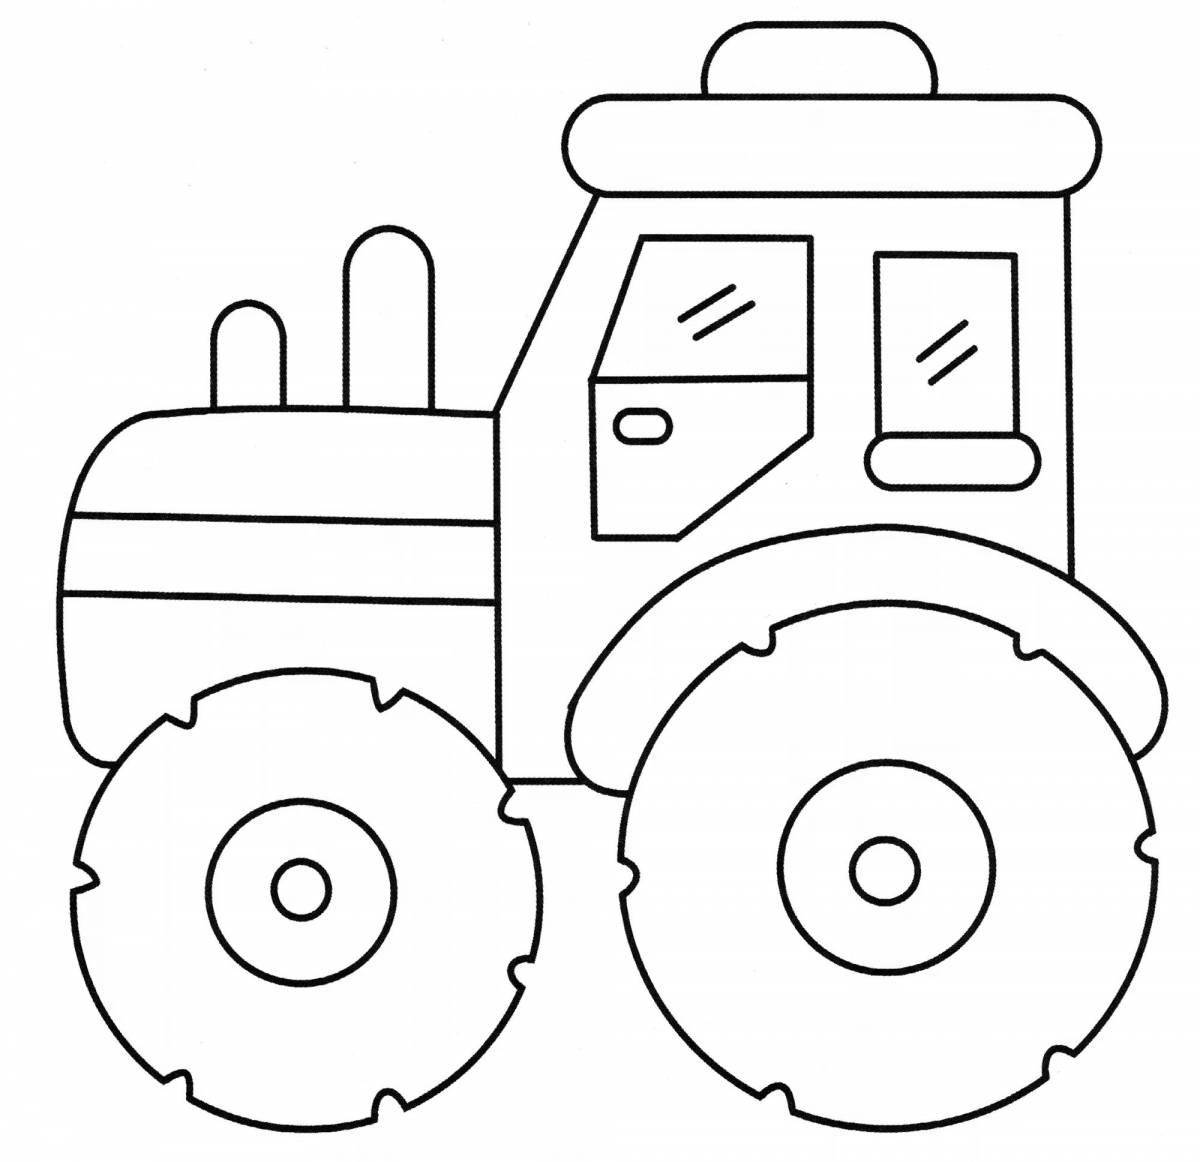 2 year old tractor colorful coloring page